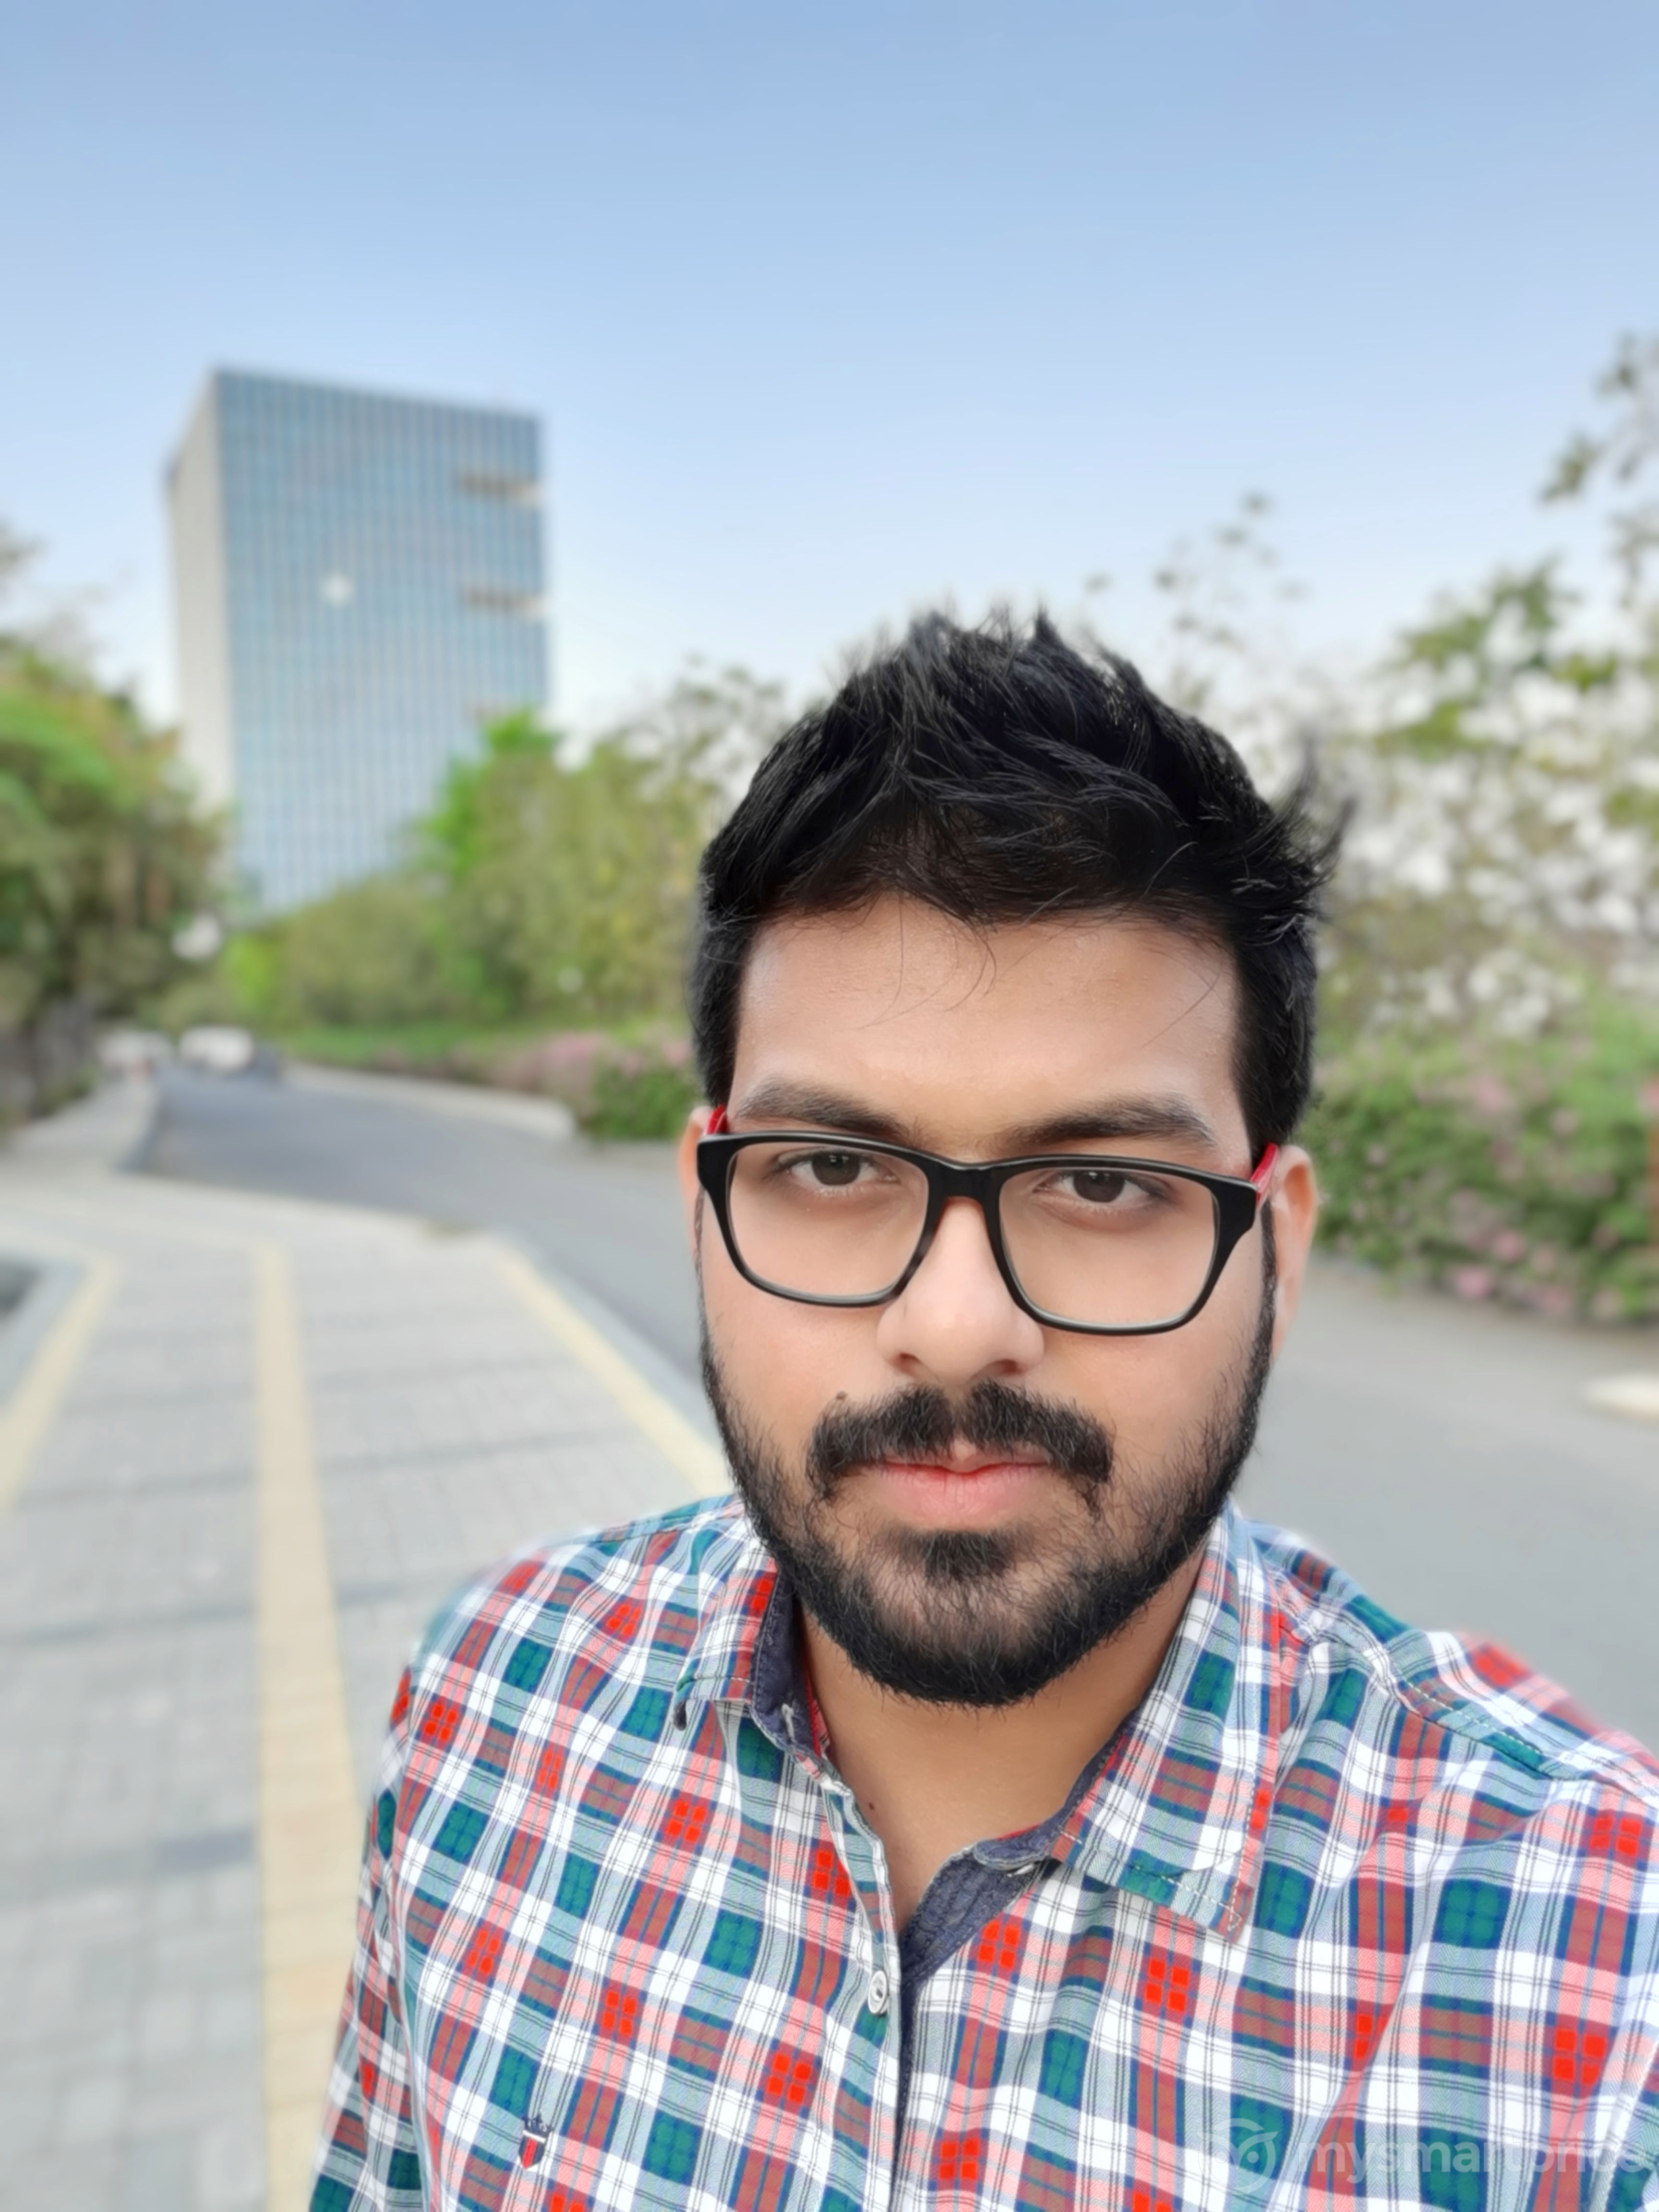 Samsung Galaxy M30 Review - Front-facing Camera Sample 06 (Portrait Mode On)